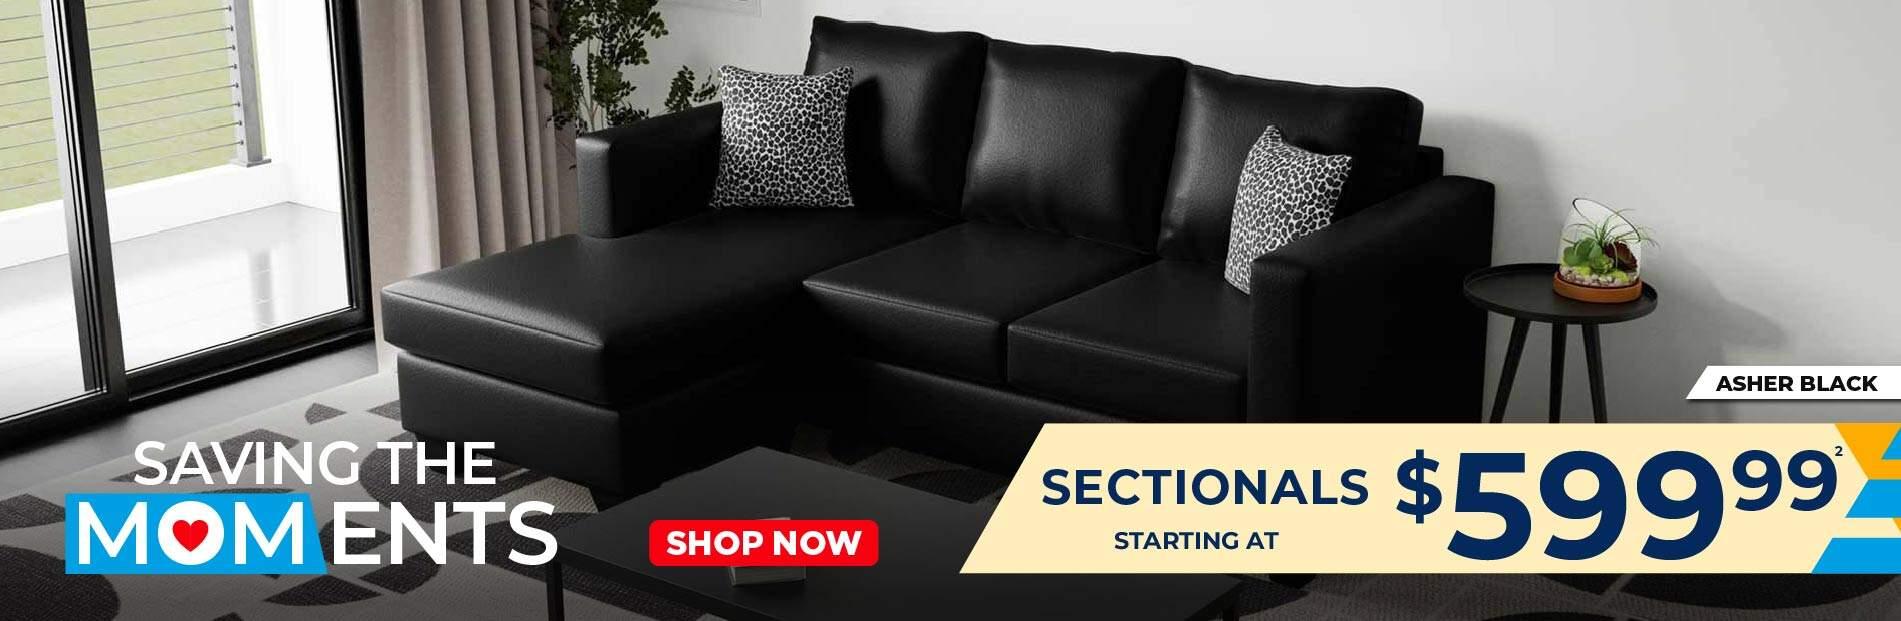 Saving the MOMents. Asher Black. Sectionals starting at $599.99. Shop Now.